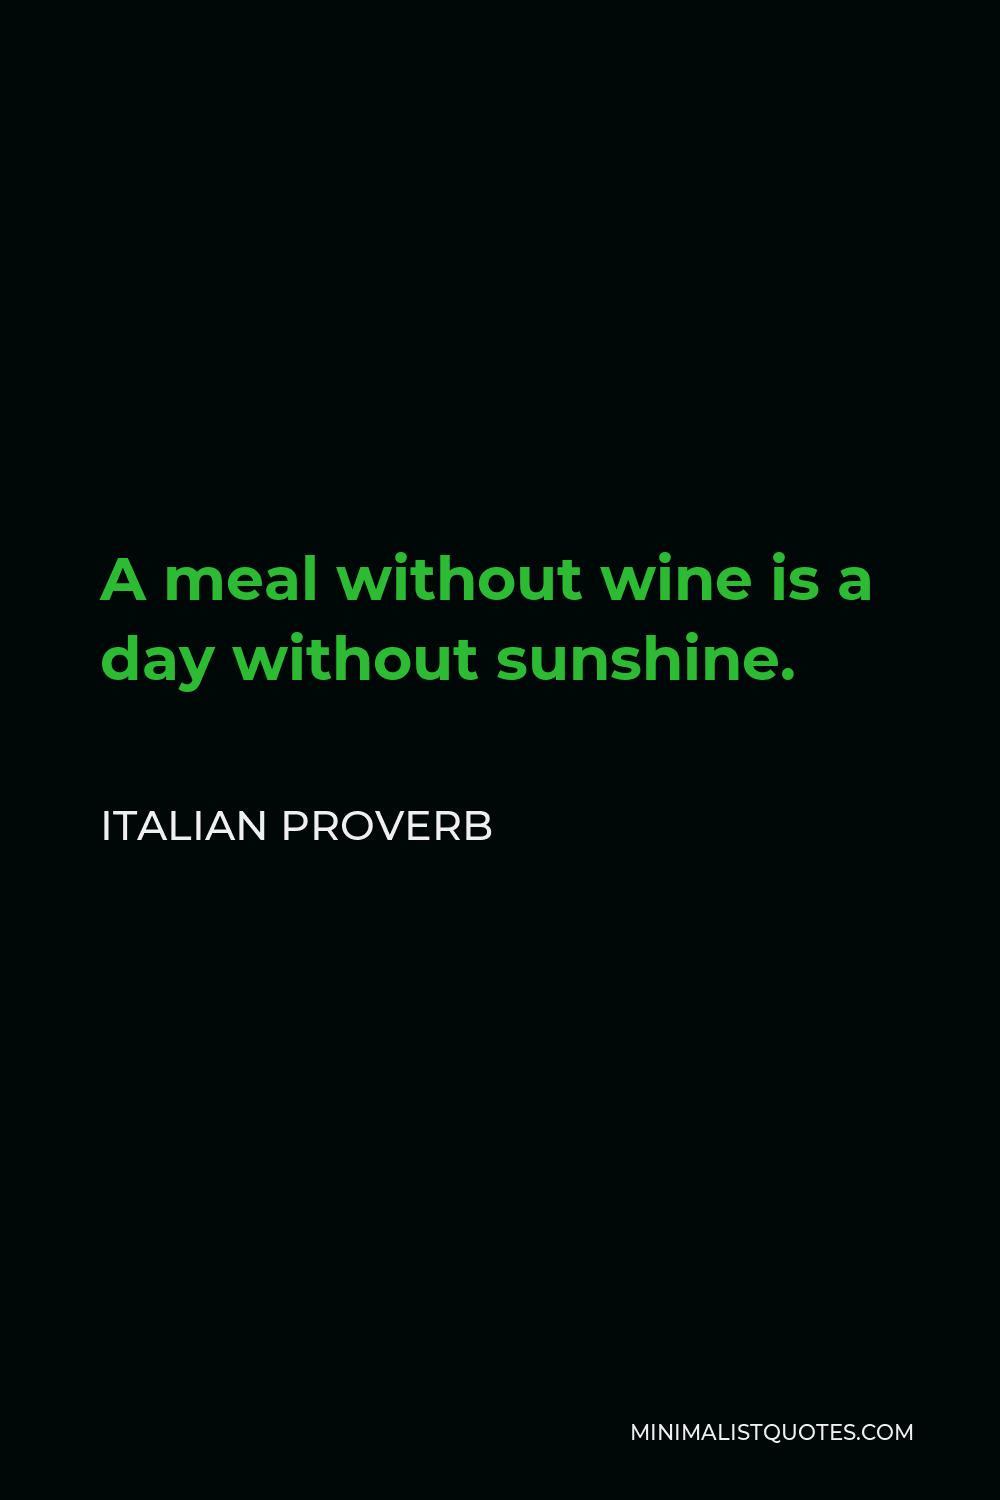 Italian Proverb Quote - A meal without wine is a day without sunshine.